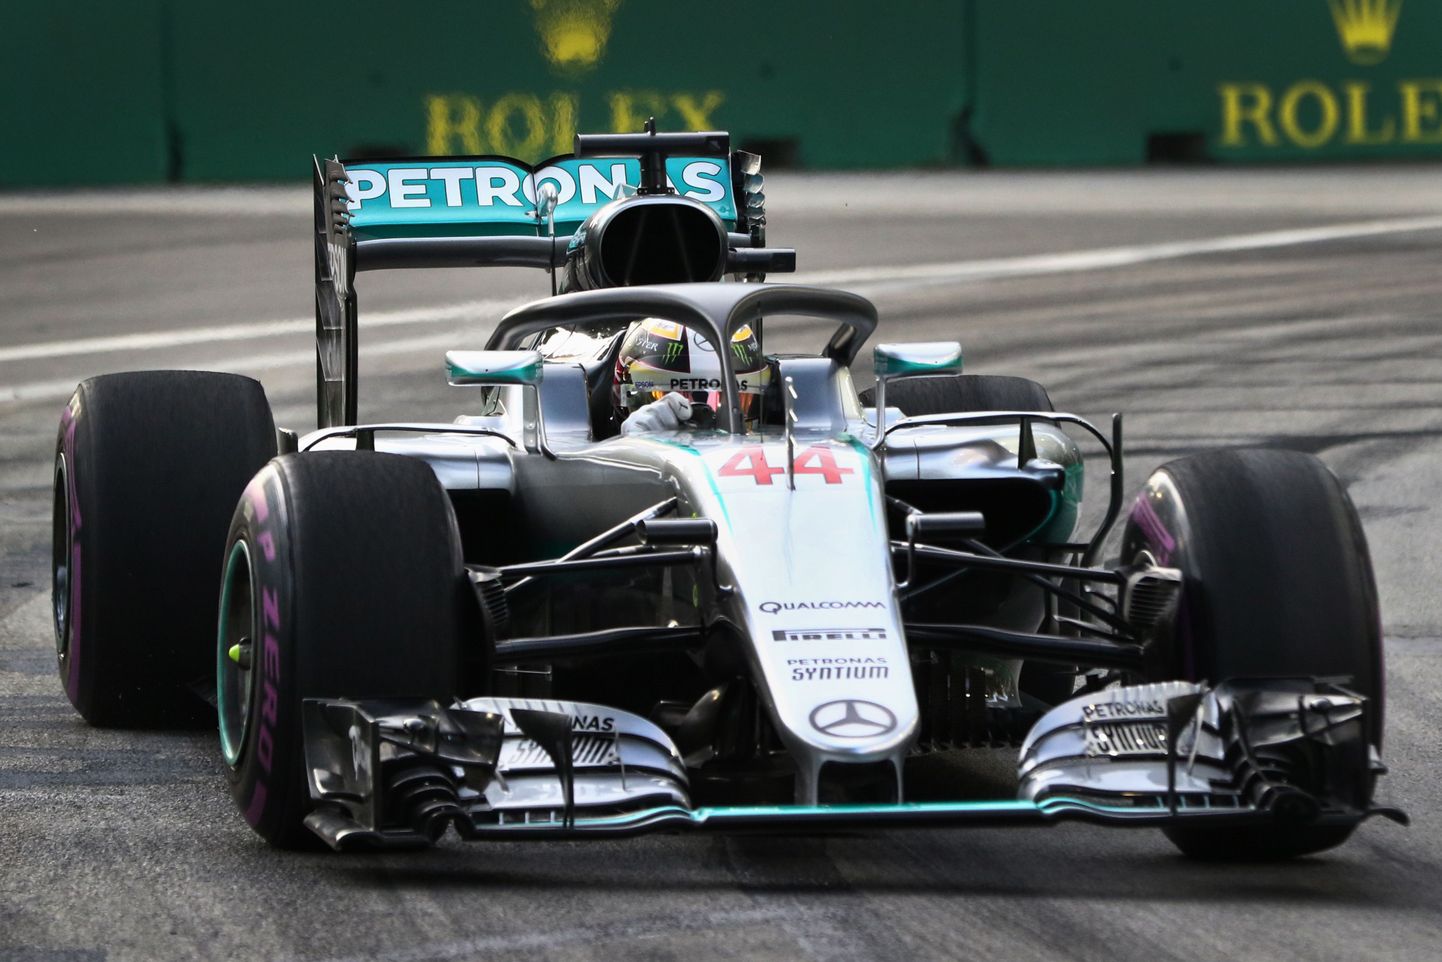 Mercedes driver Lewis Hamilton of Britain steers his car during the first practice session for the Singapore Formula One Grand Prix on the Marina Bay City Circuit Singapore, Friday, Sept. 16, 2016. (AP Photo/Yong Teck Lim)